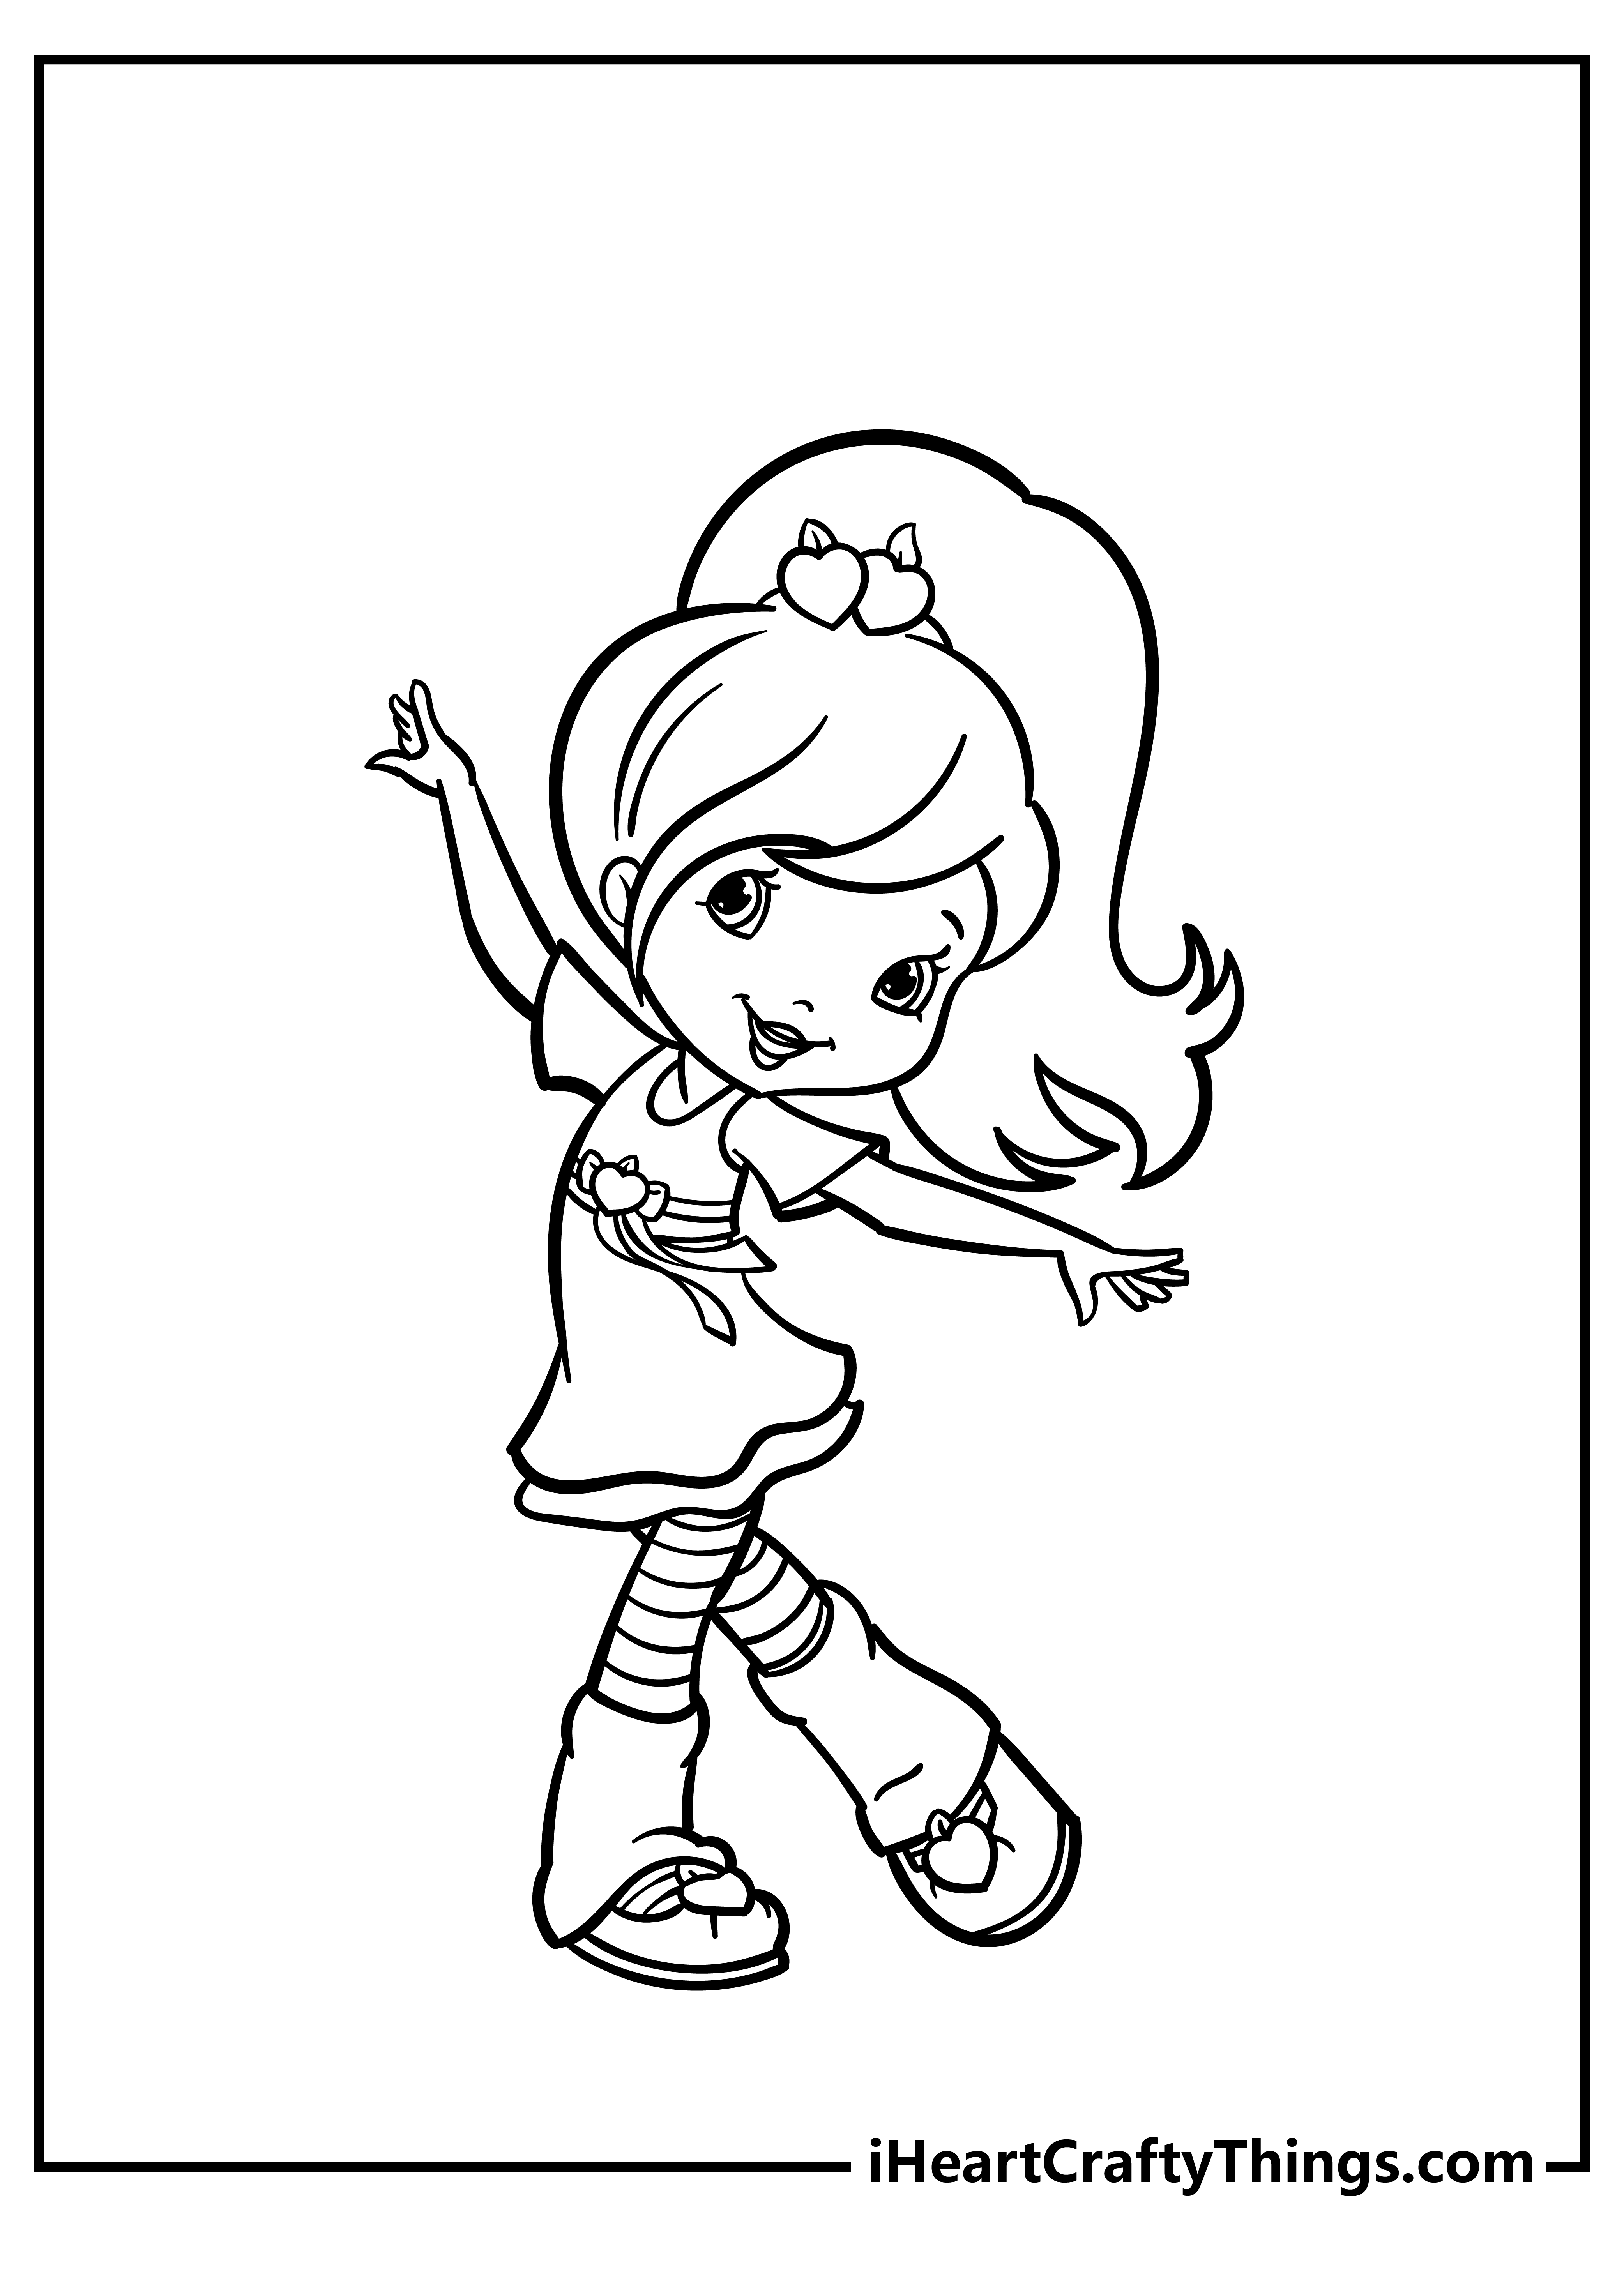 Strawberry shortcake coloring pages free printables